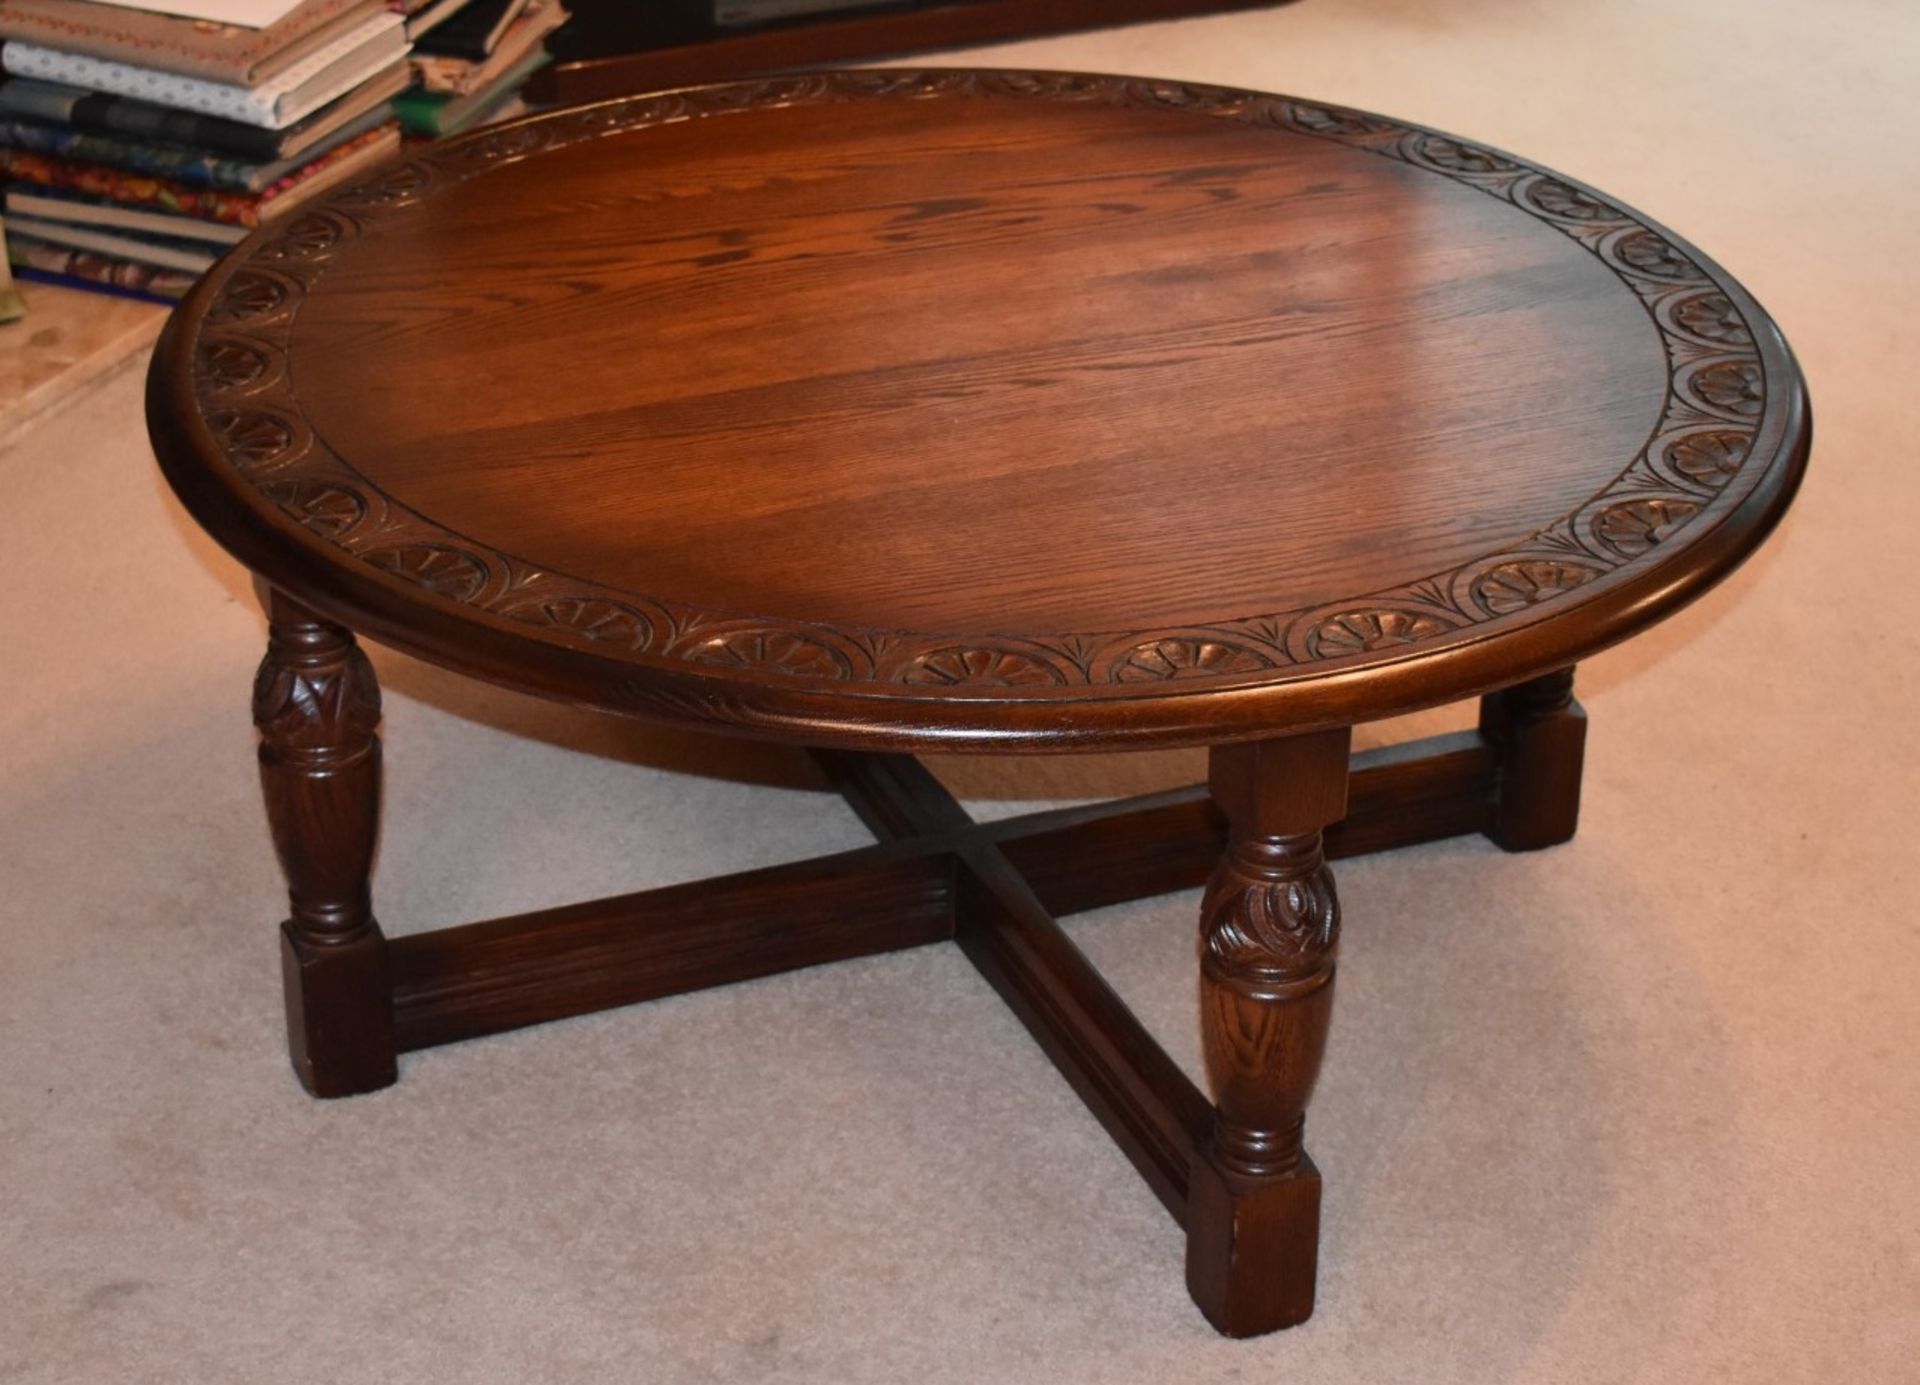 1 x Round Carved Oak Coffee Table By Jaycee - JacobeanStyle With Turned Legs, Joining Stretchers and - Image 3 of 8